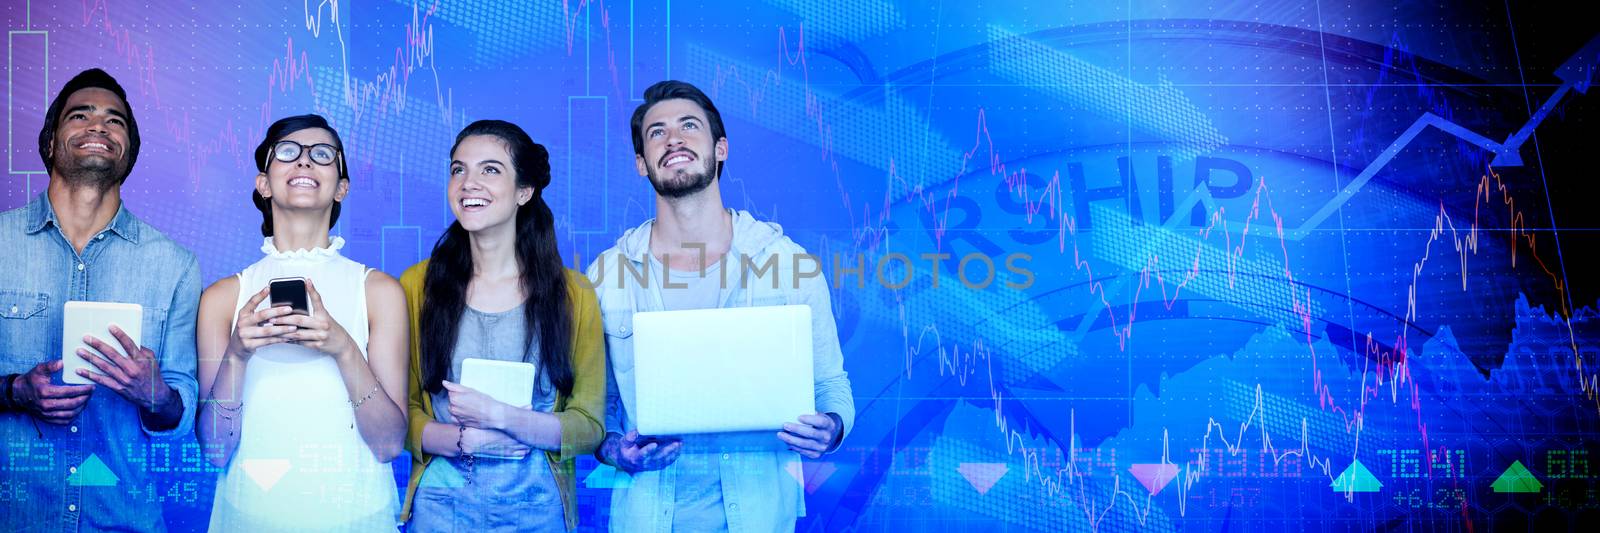 Smiling business people holding technology while looking up against high angle view of crowded buildings in city